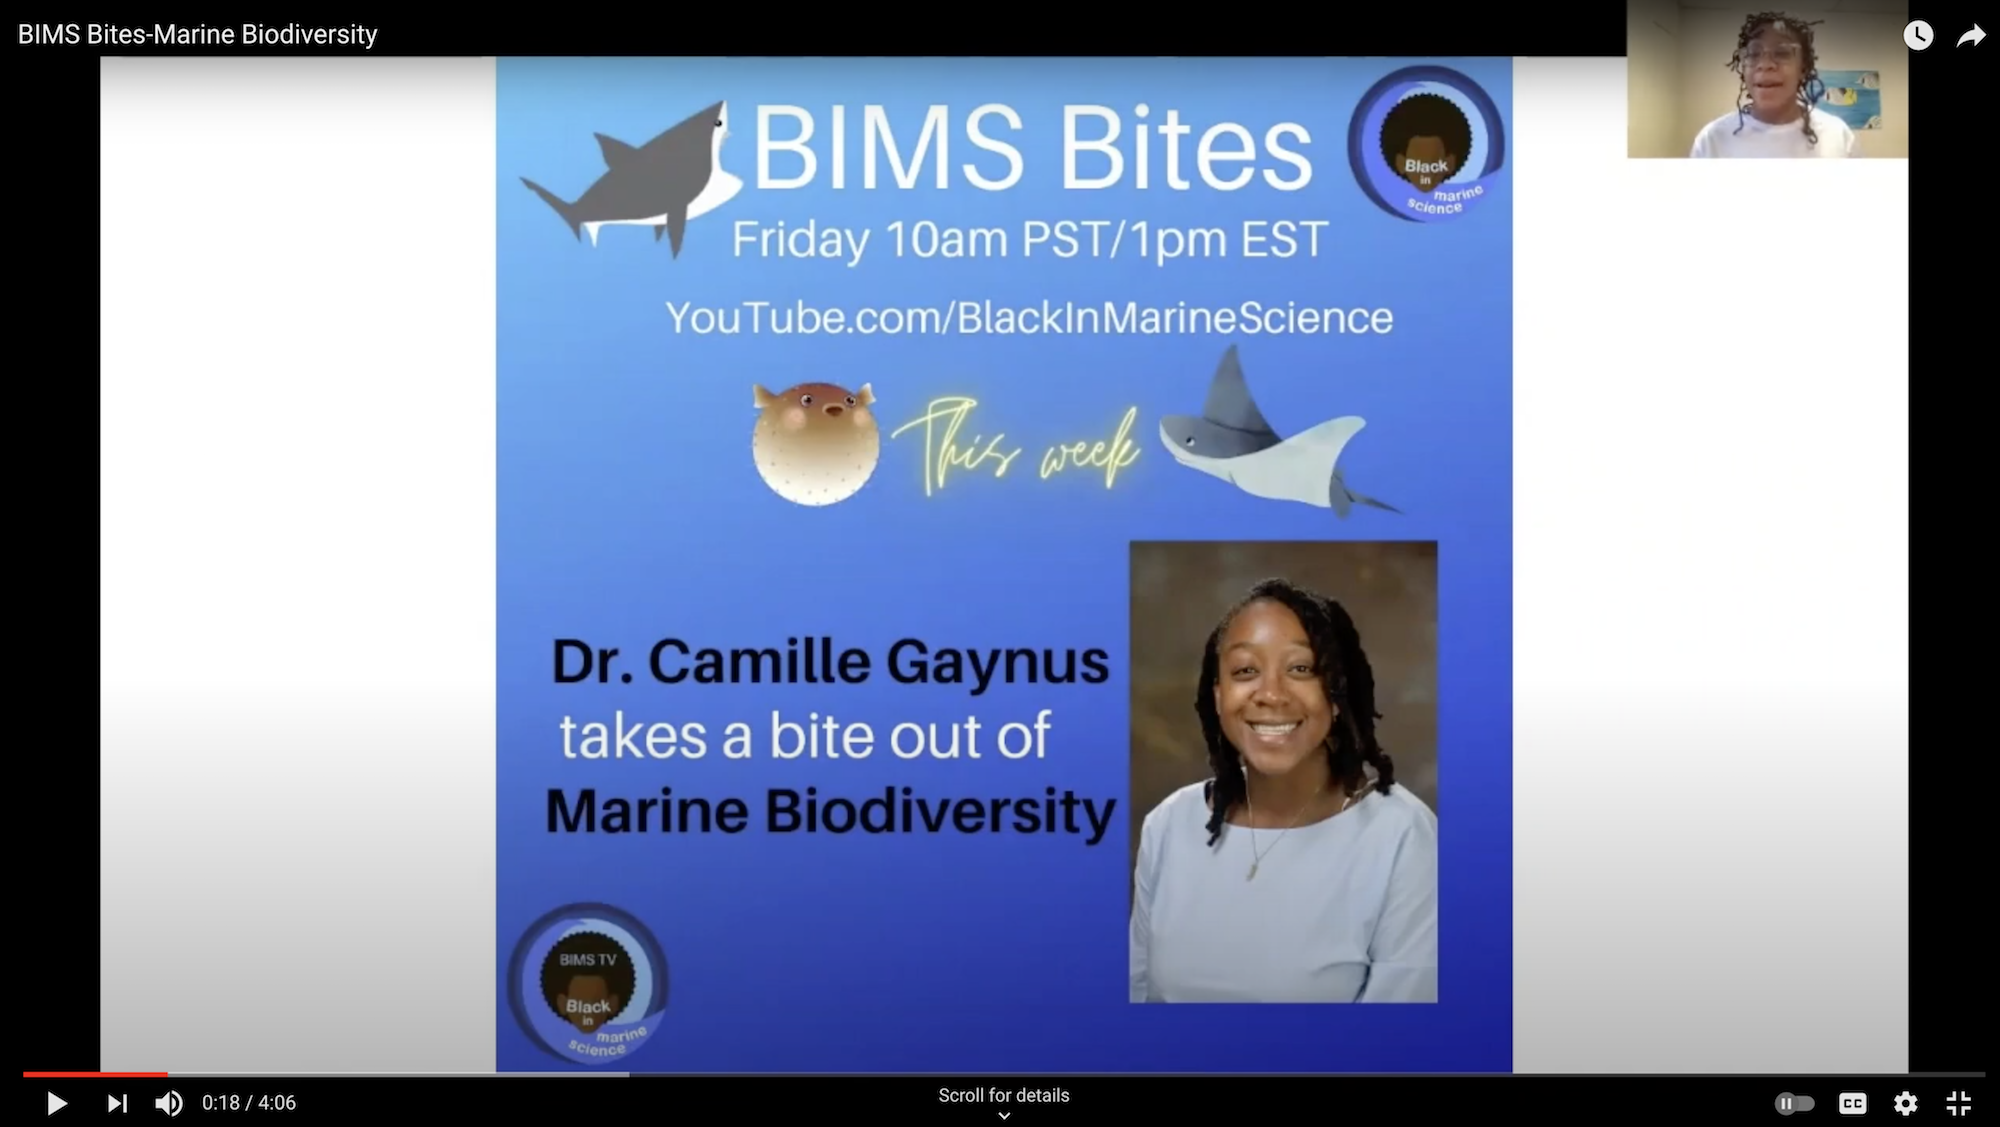 A YouTube screenshot of the program BIMS Bites, saying "Dr. Camille Gaynus takes a bite out of Marine Biodiversity"